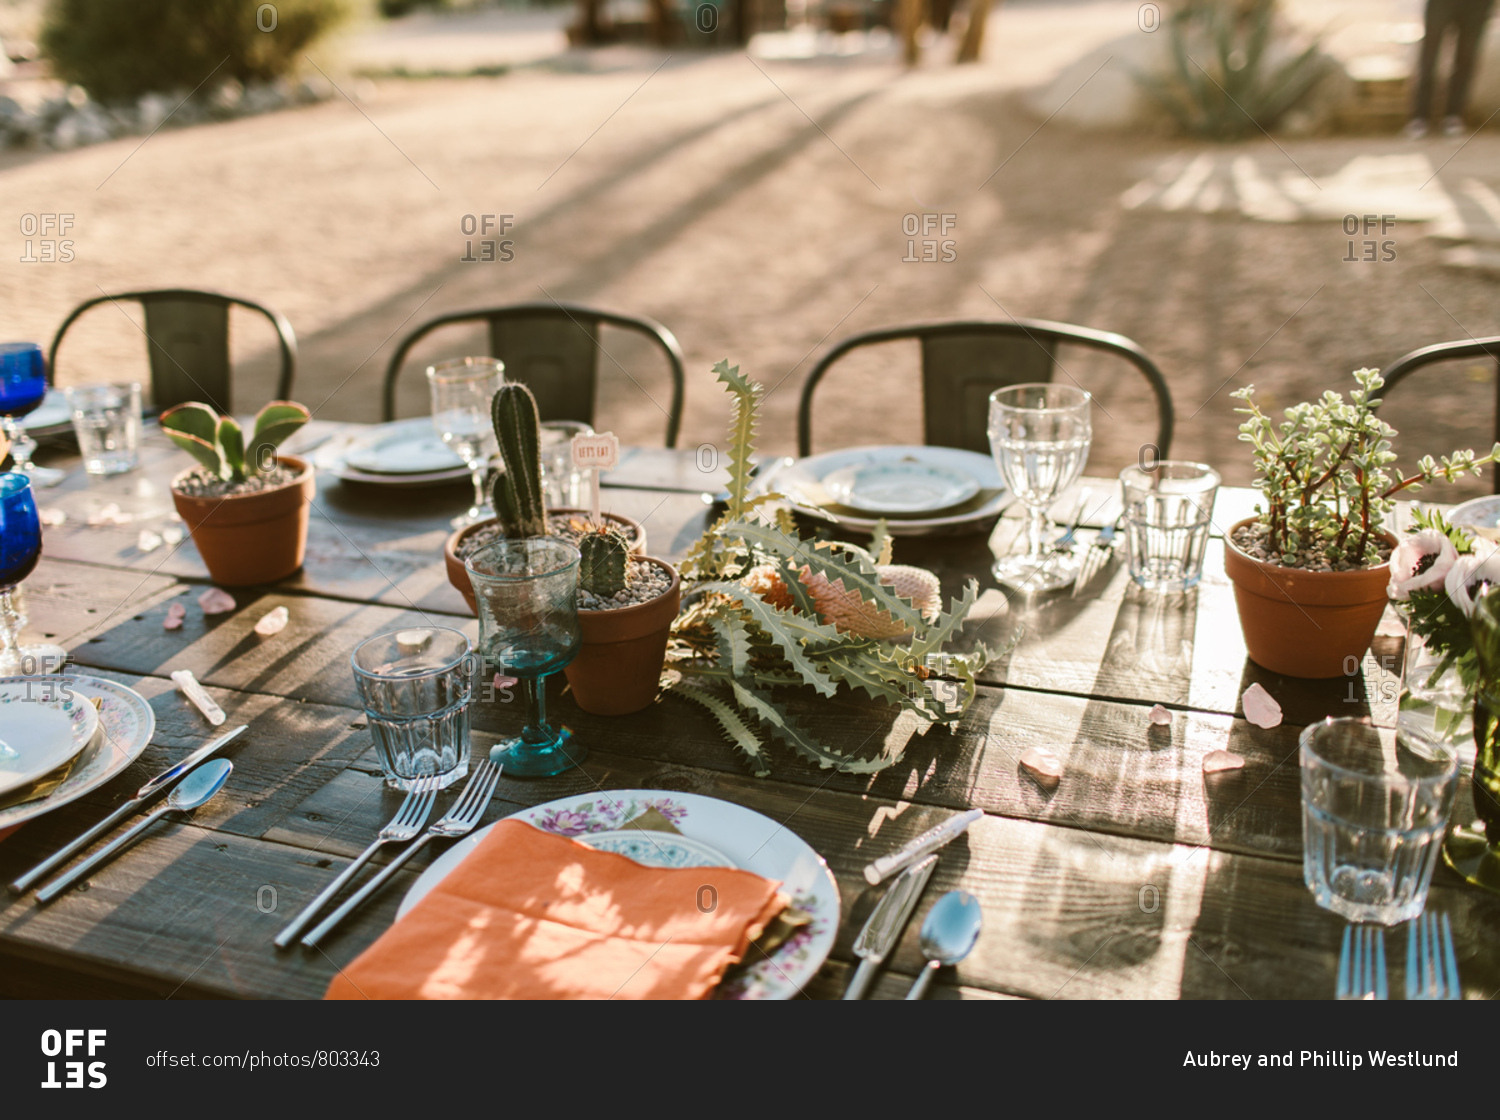 Table setting in the desert with cactus center piece